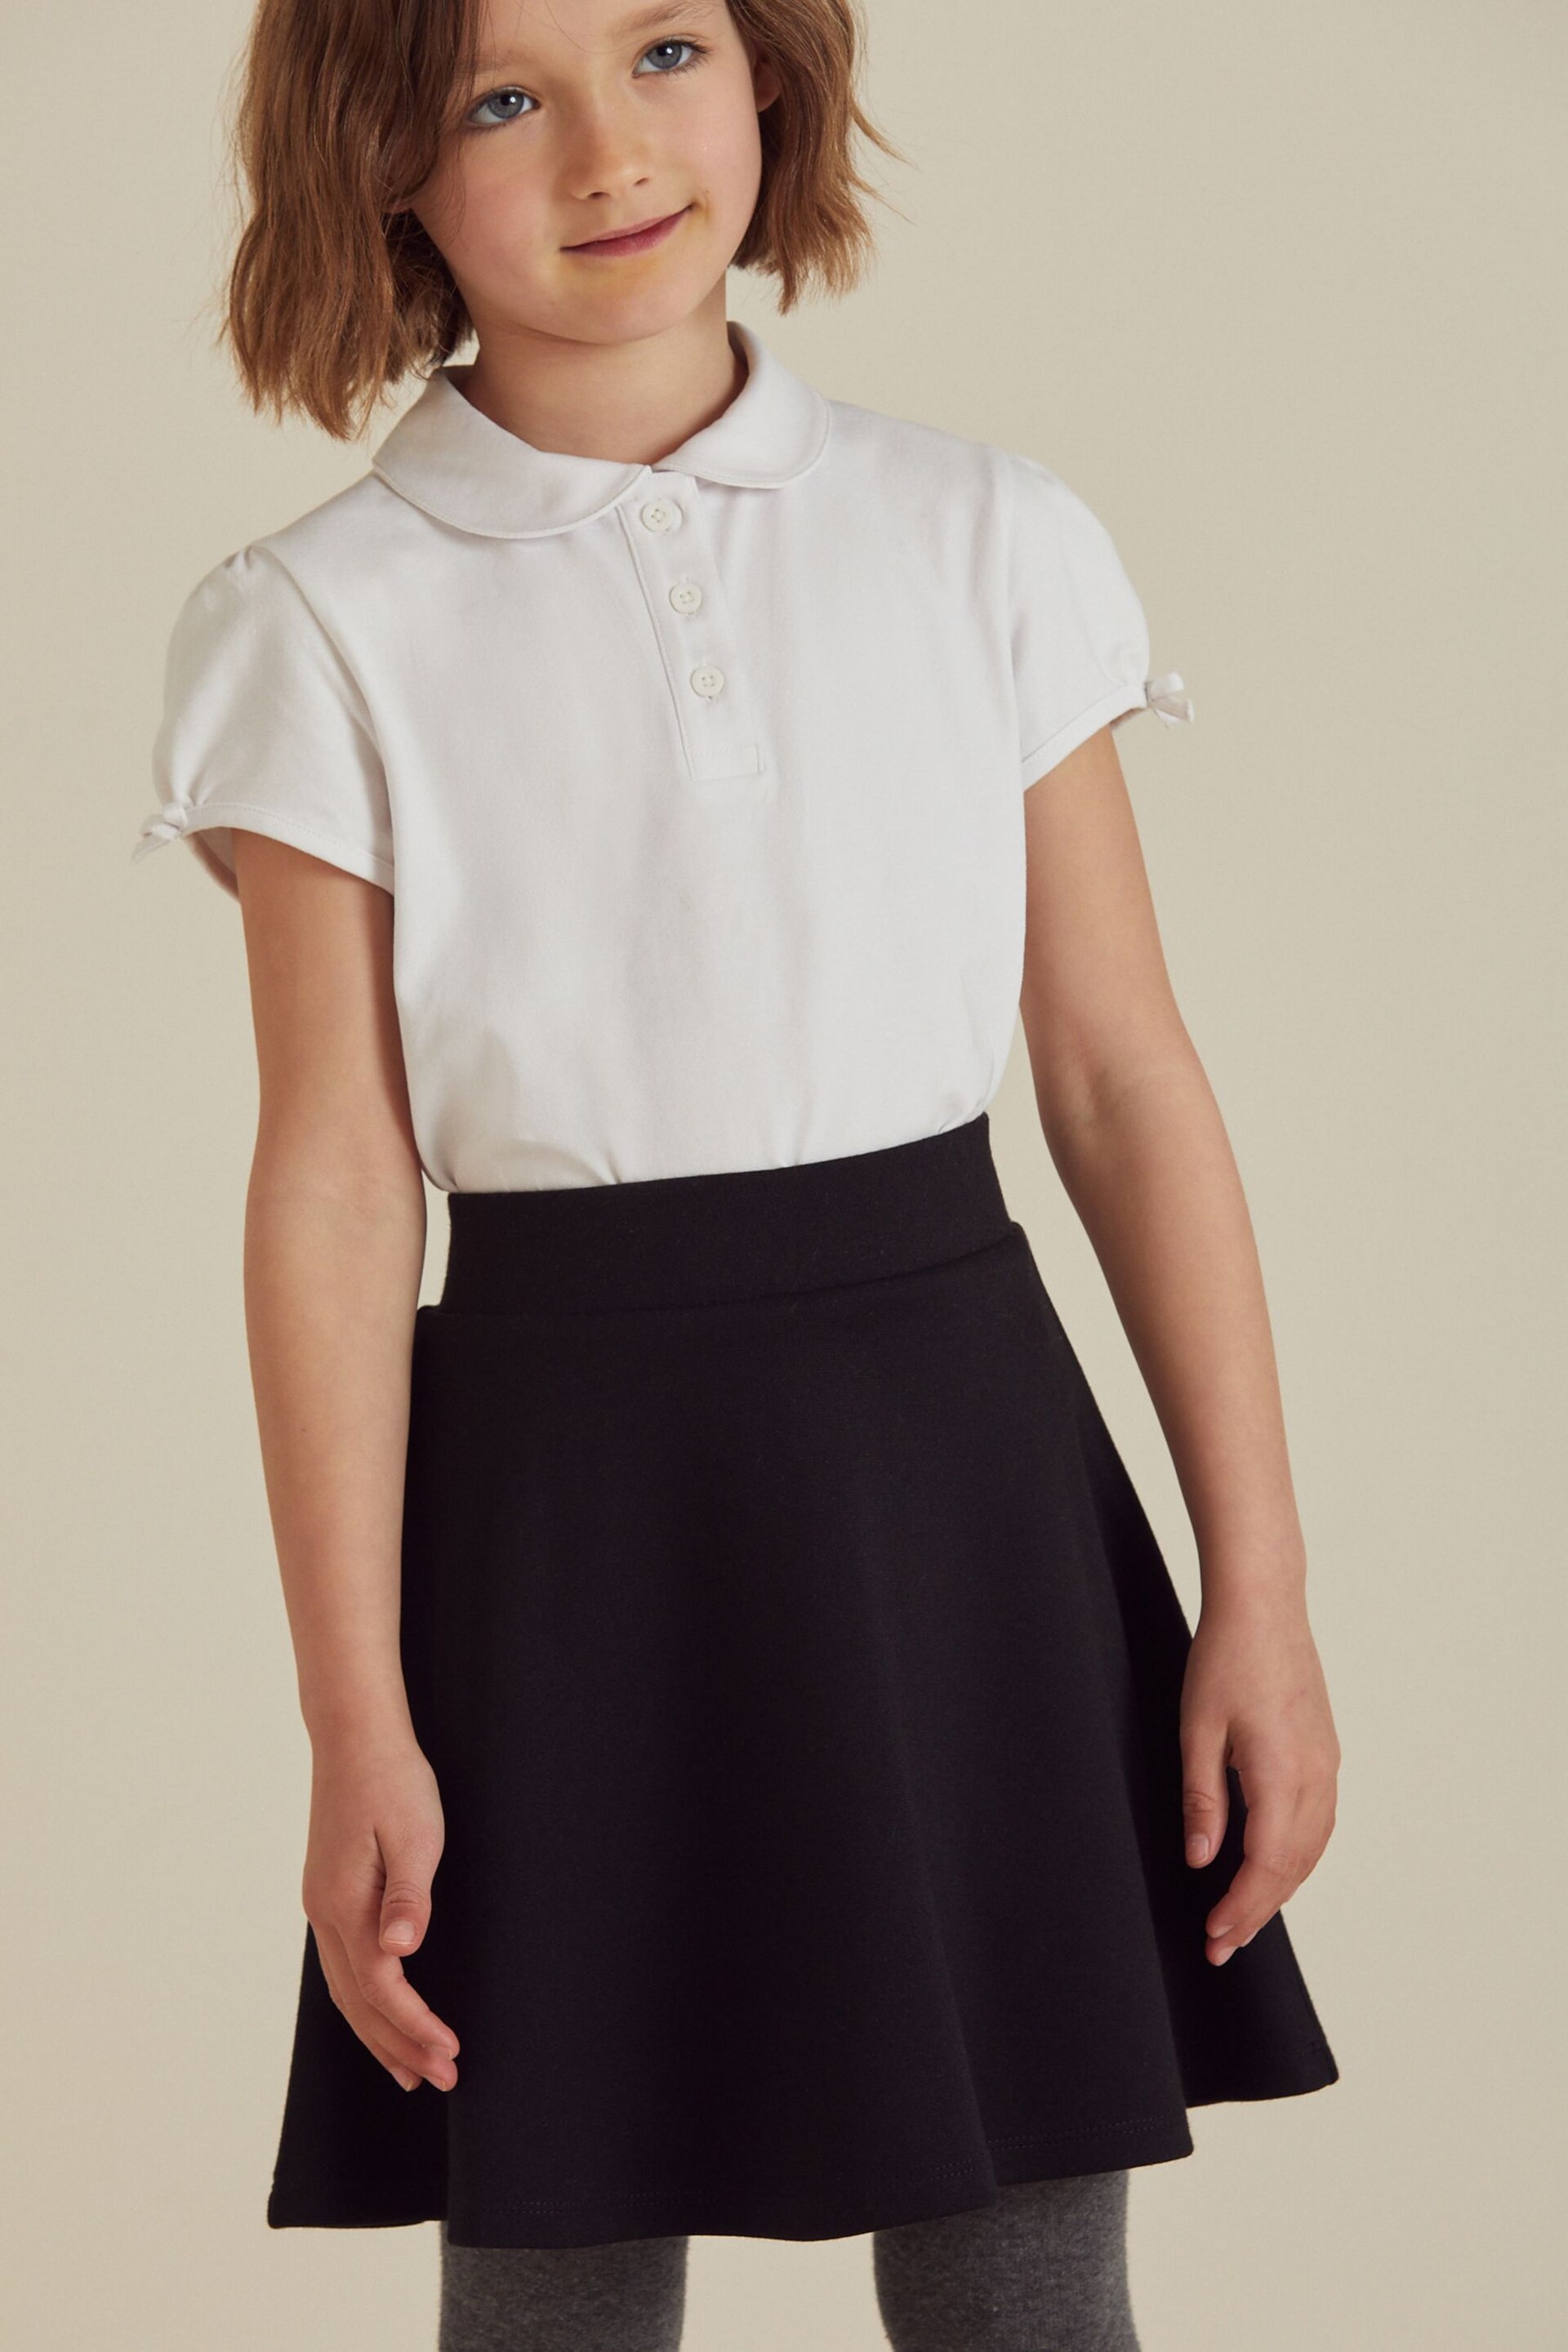 Black Pull-On Skort with Jersey Stretch (3-17yrs) - Image 1 of 7